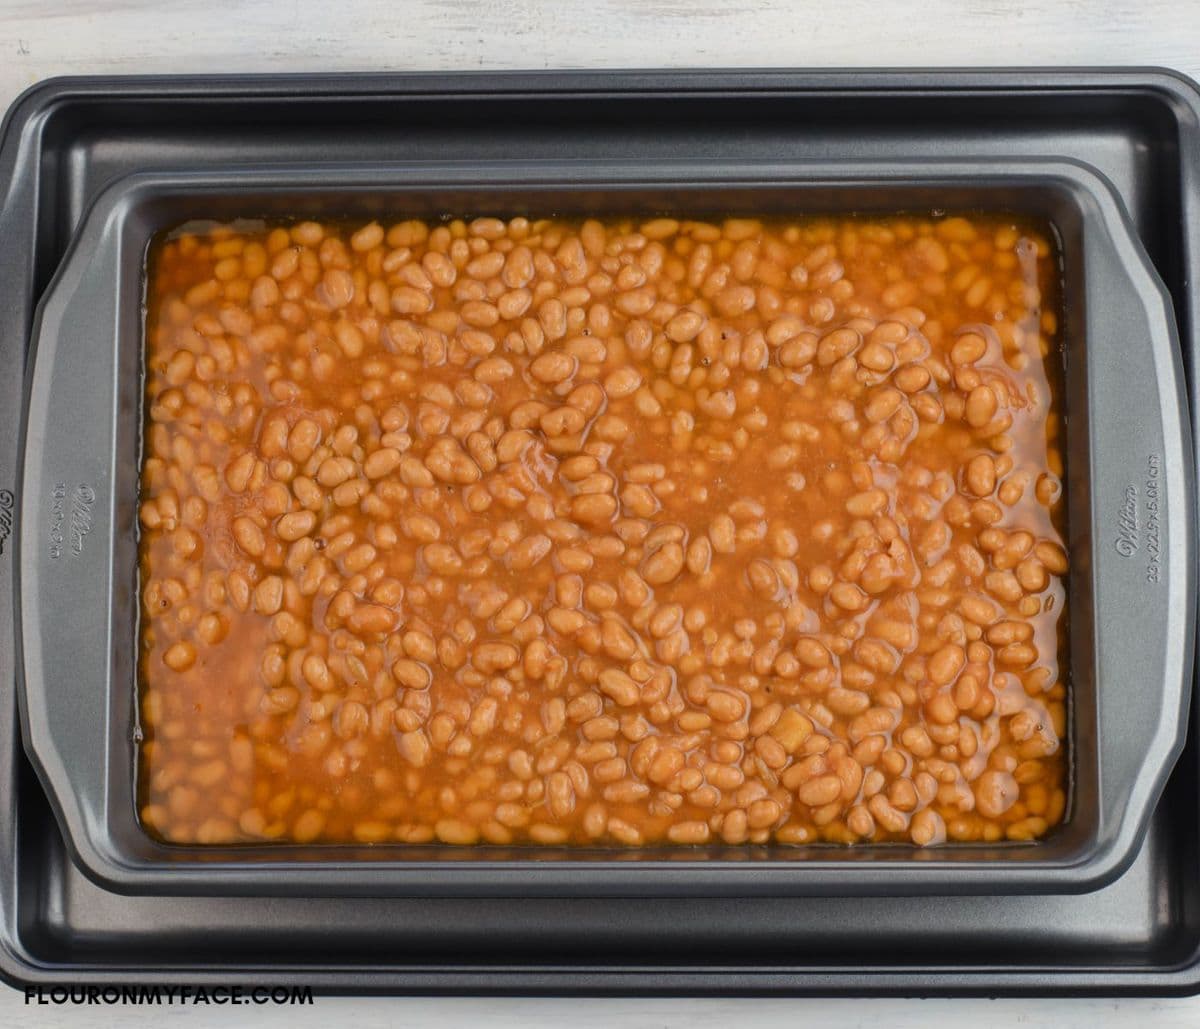 Canned pork and beans in a 9 x 13 baking pan.